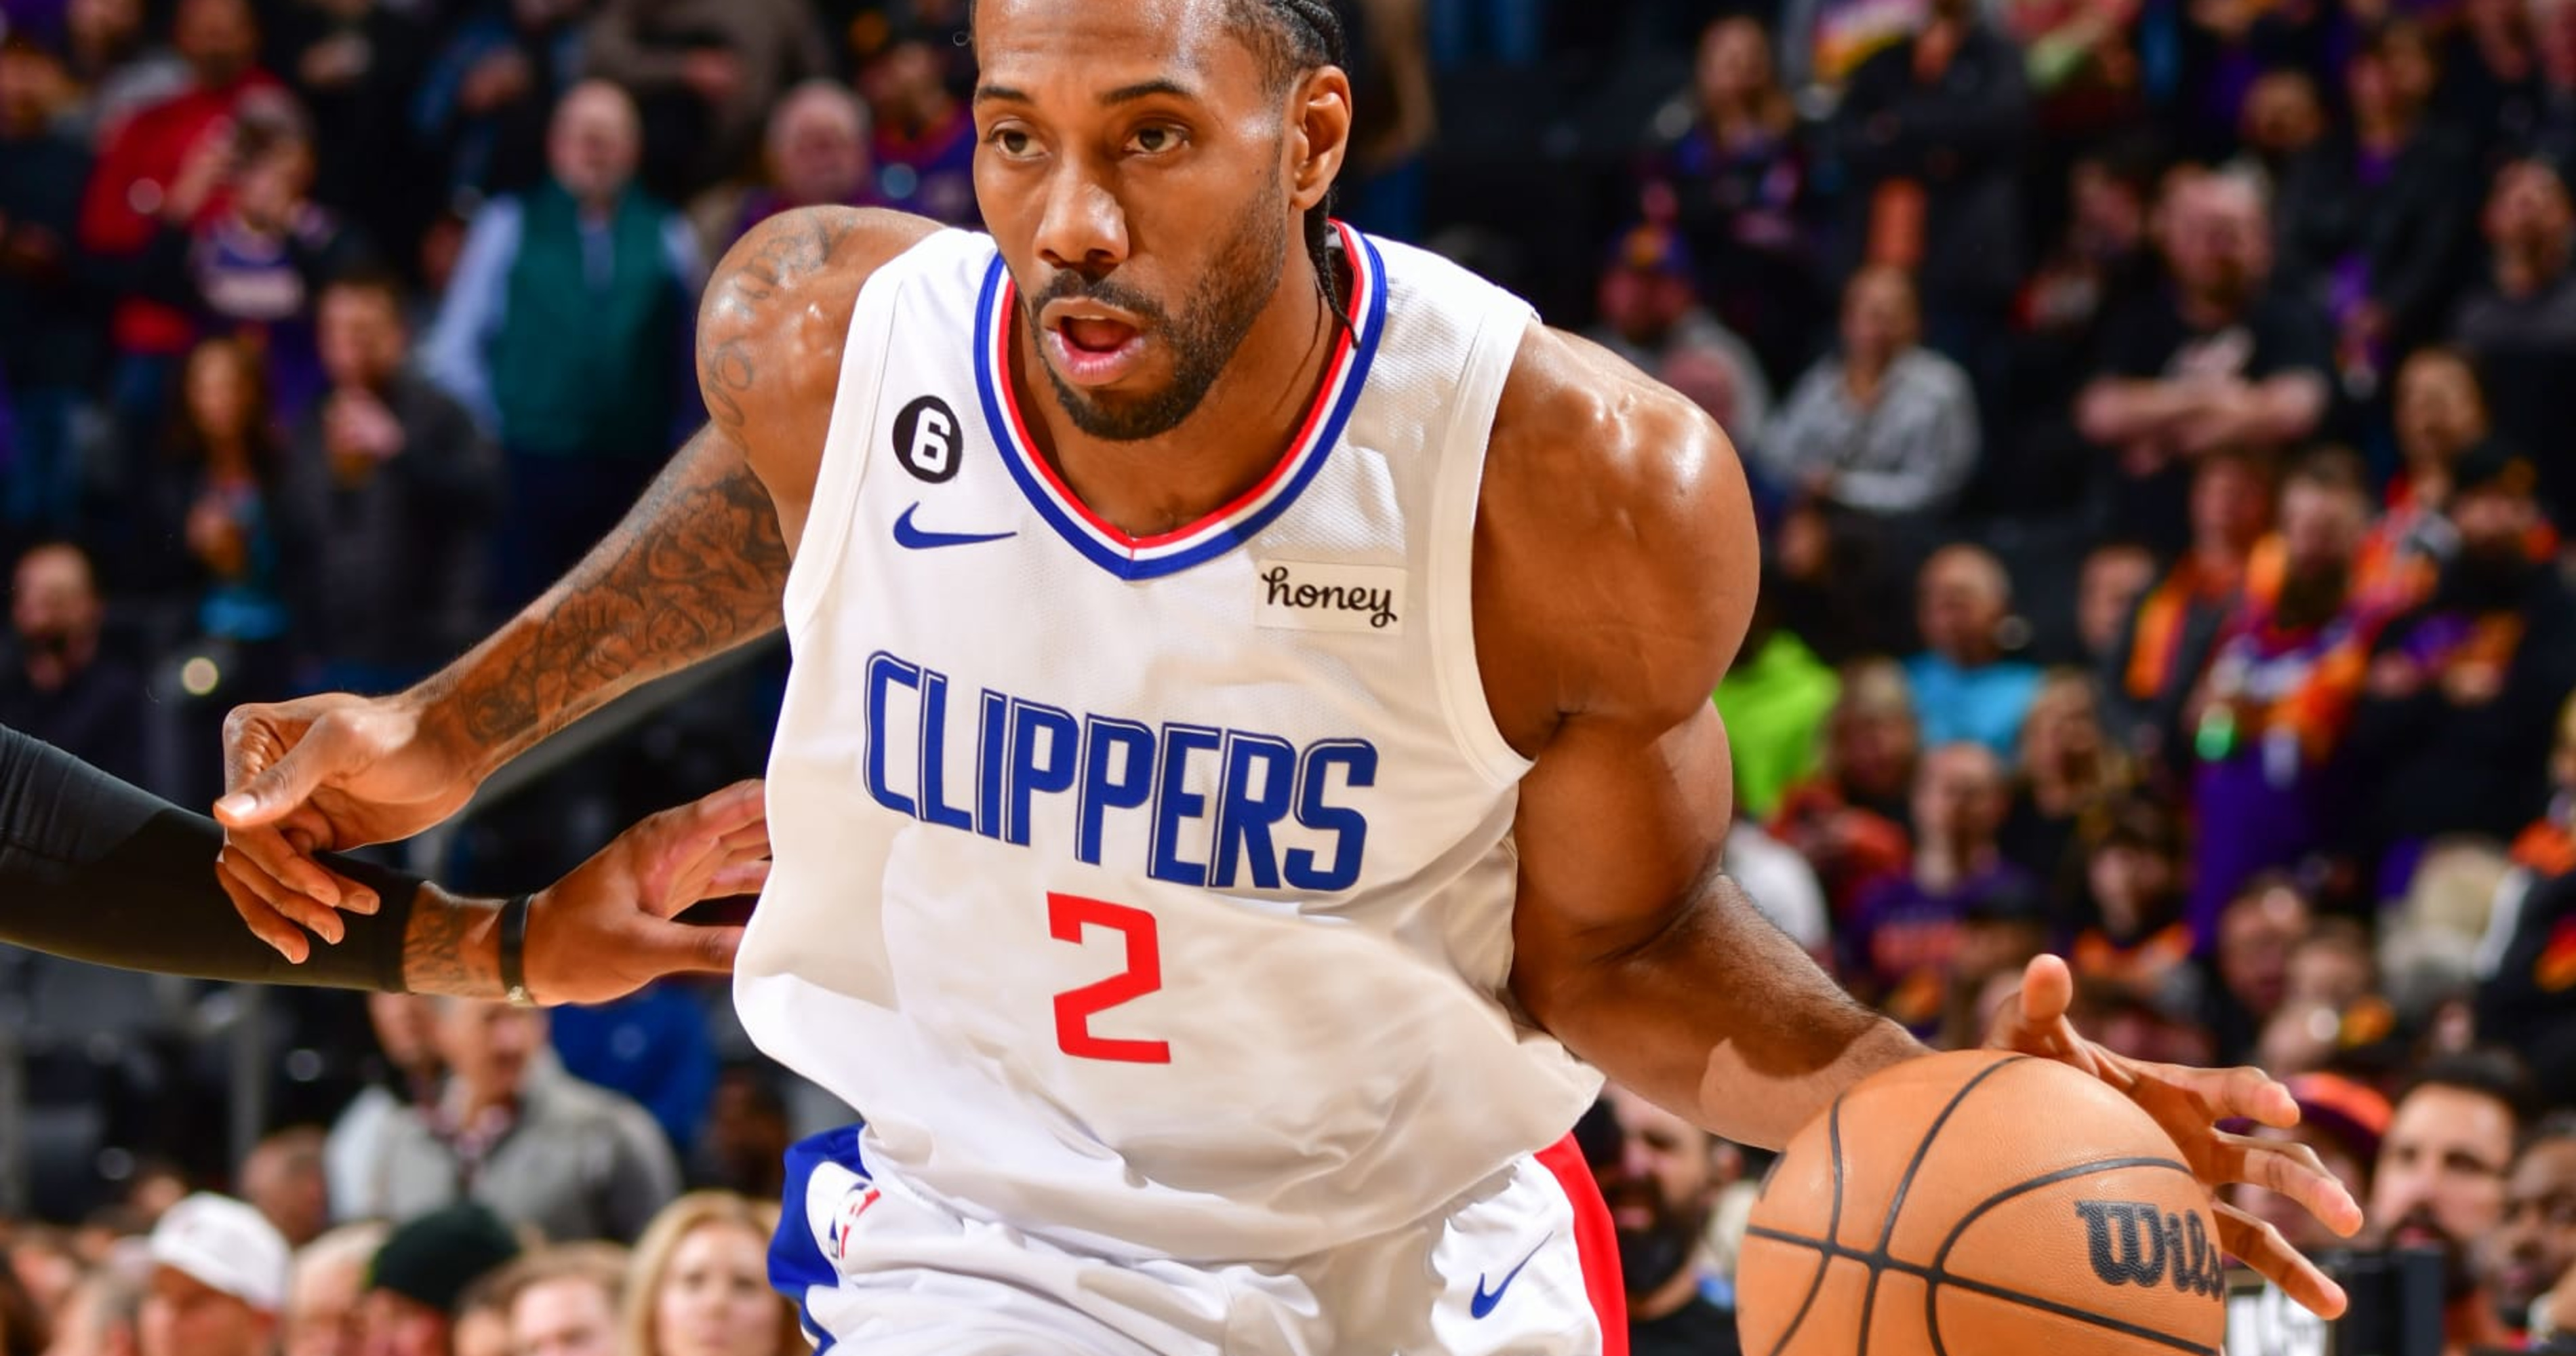 Is Kawhi Leonard out for the Clippers in game 3 against the Suns? - Quora